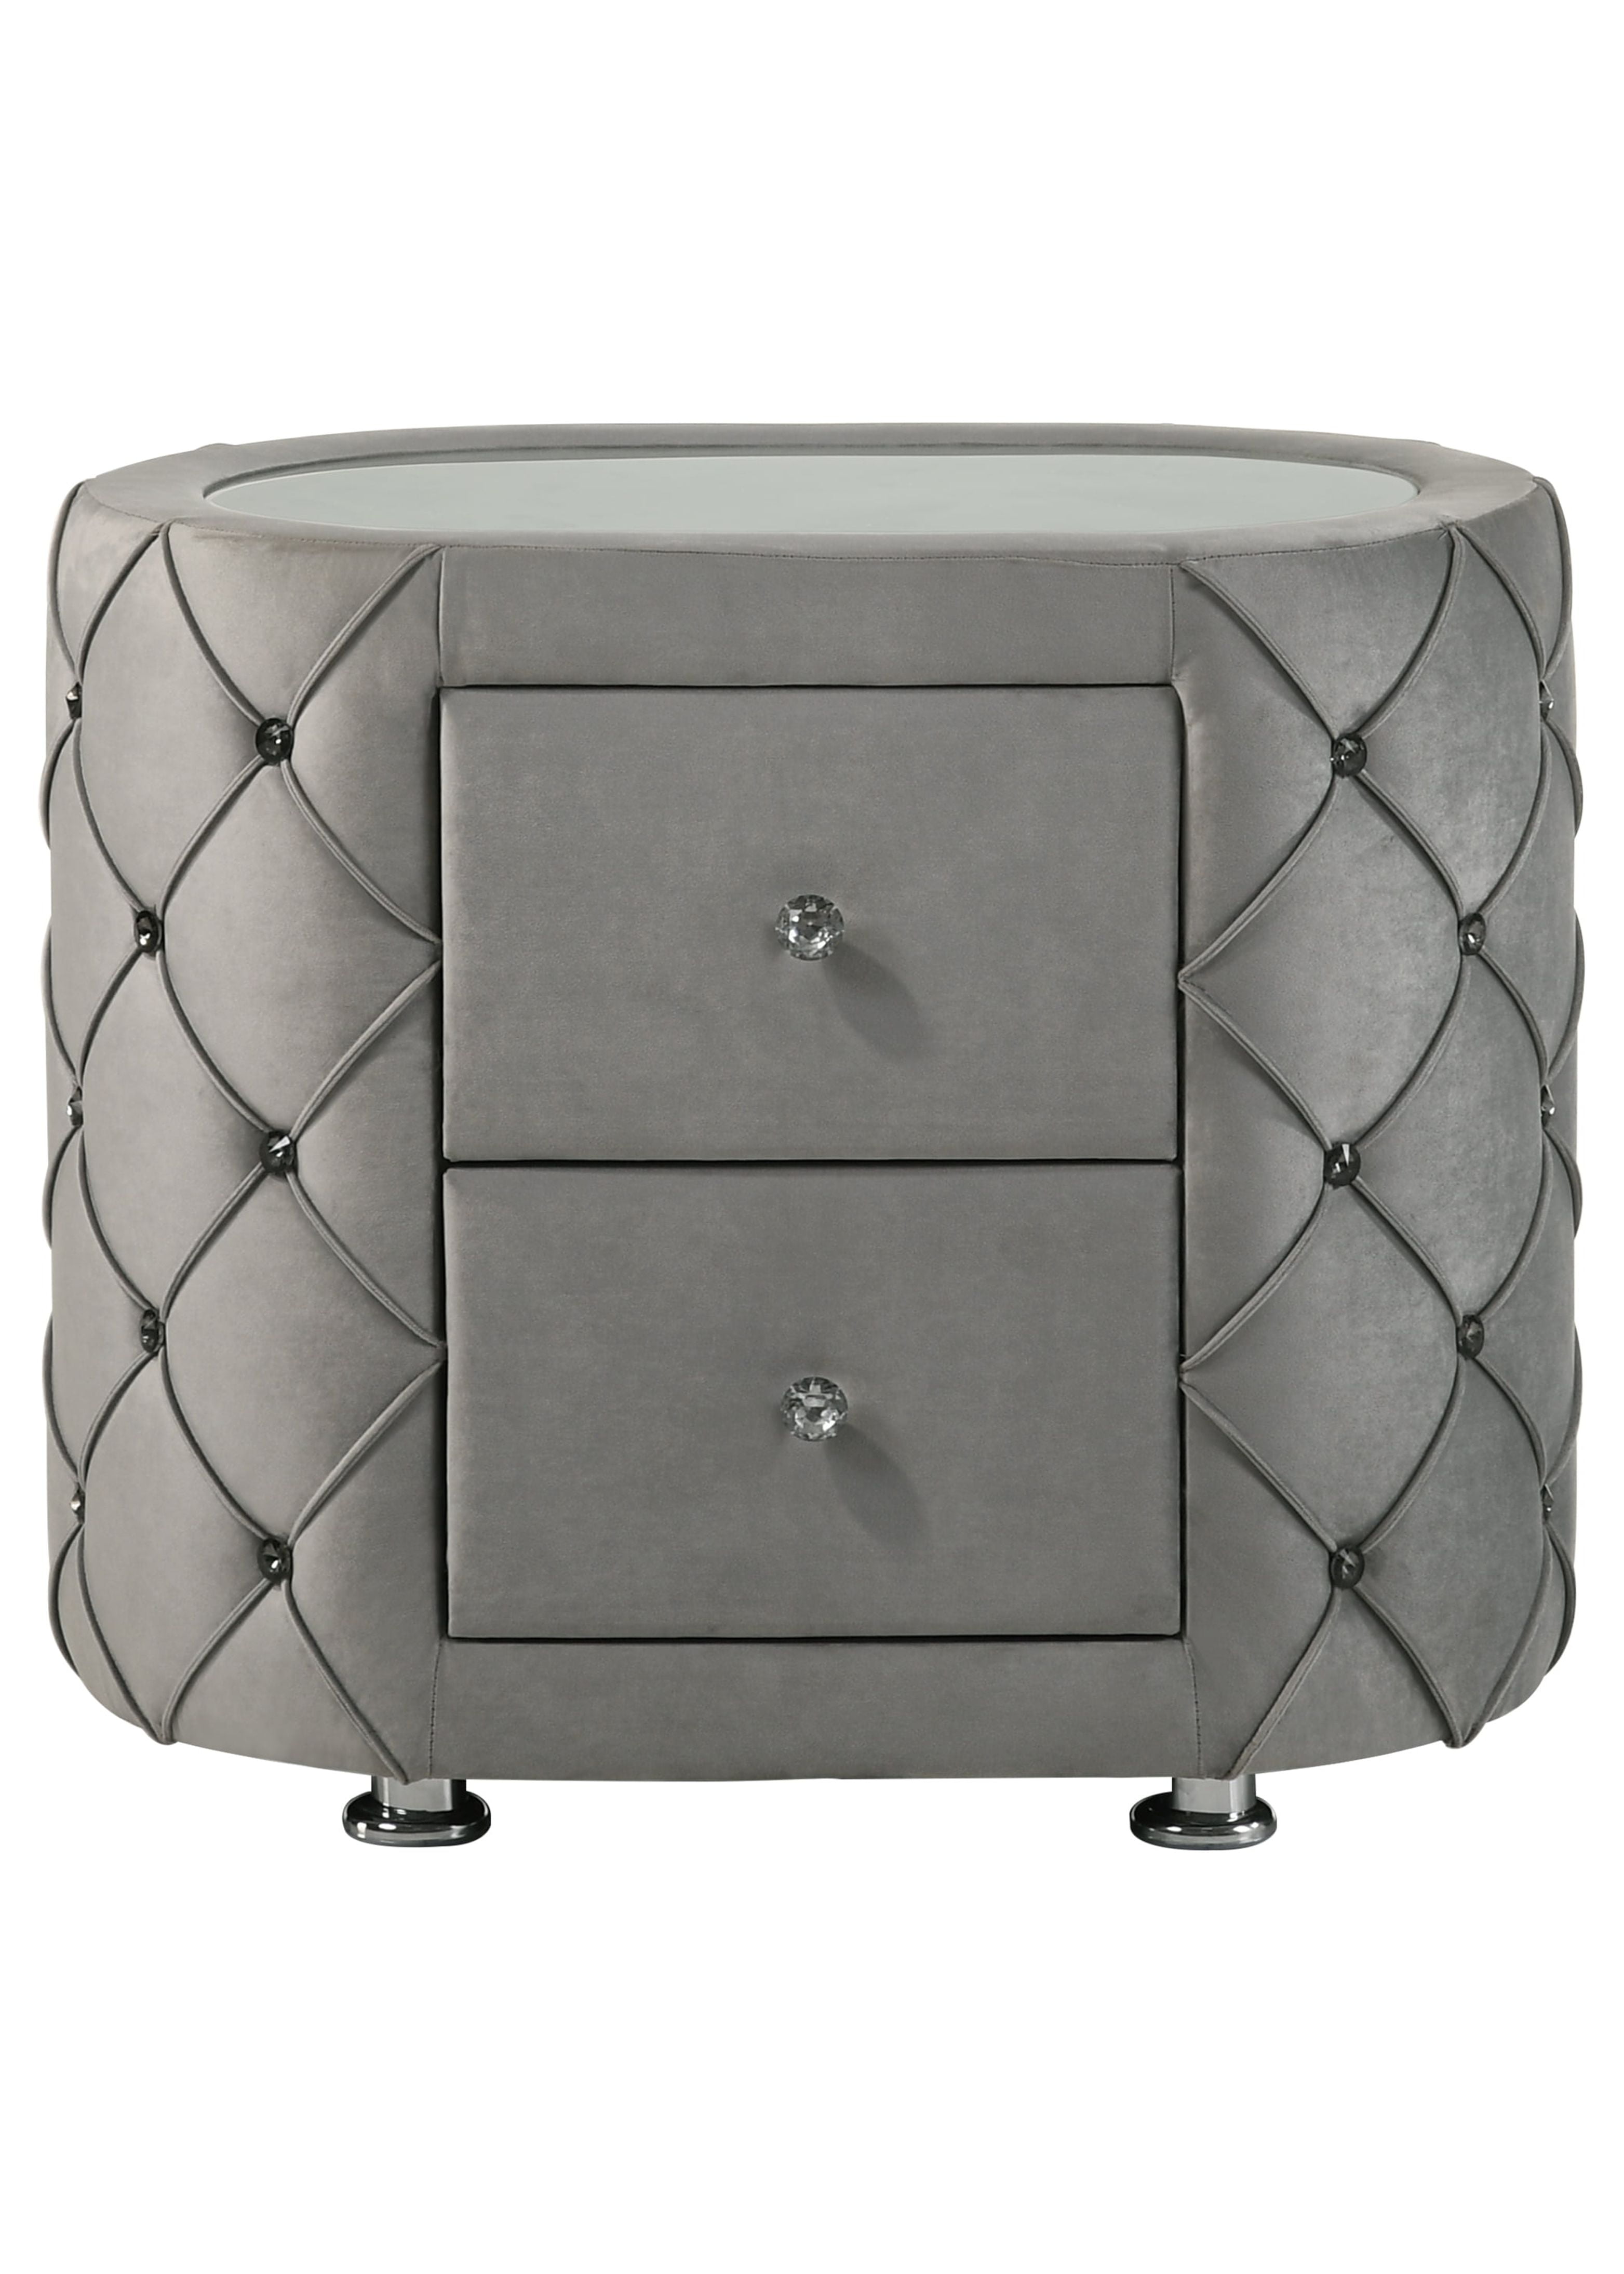 Picture of Acme Furniture BD01063 29 x 19 x 23 in. Perine Nightstand, Gray Velvet